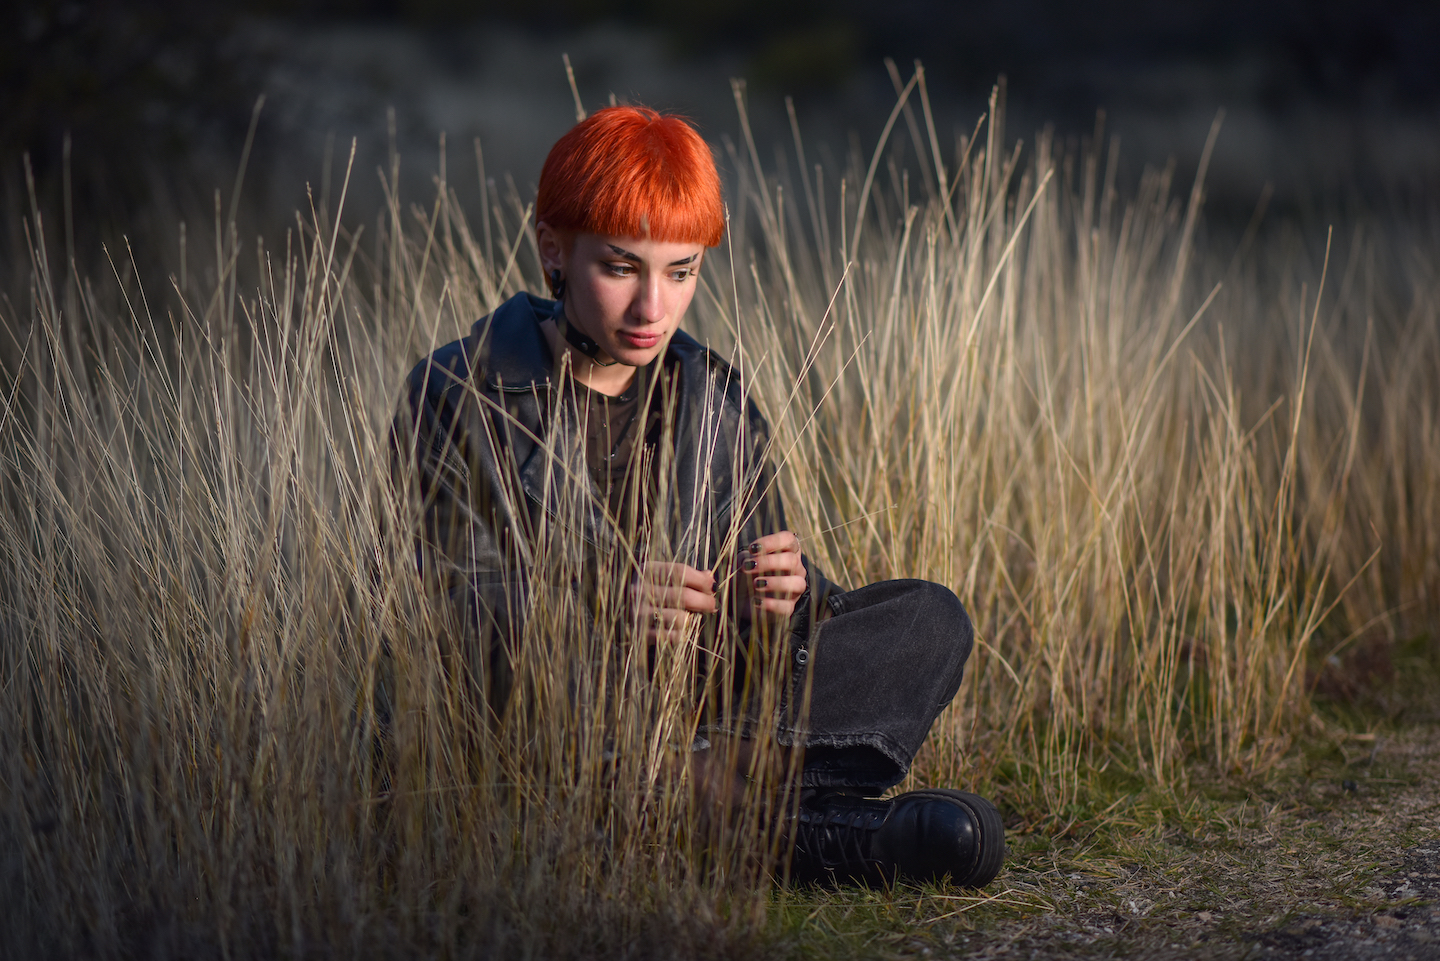 a girl with short red hair sits solemnly on the ground